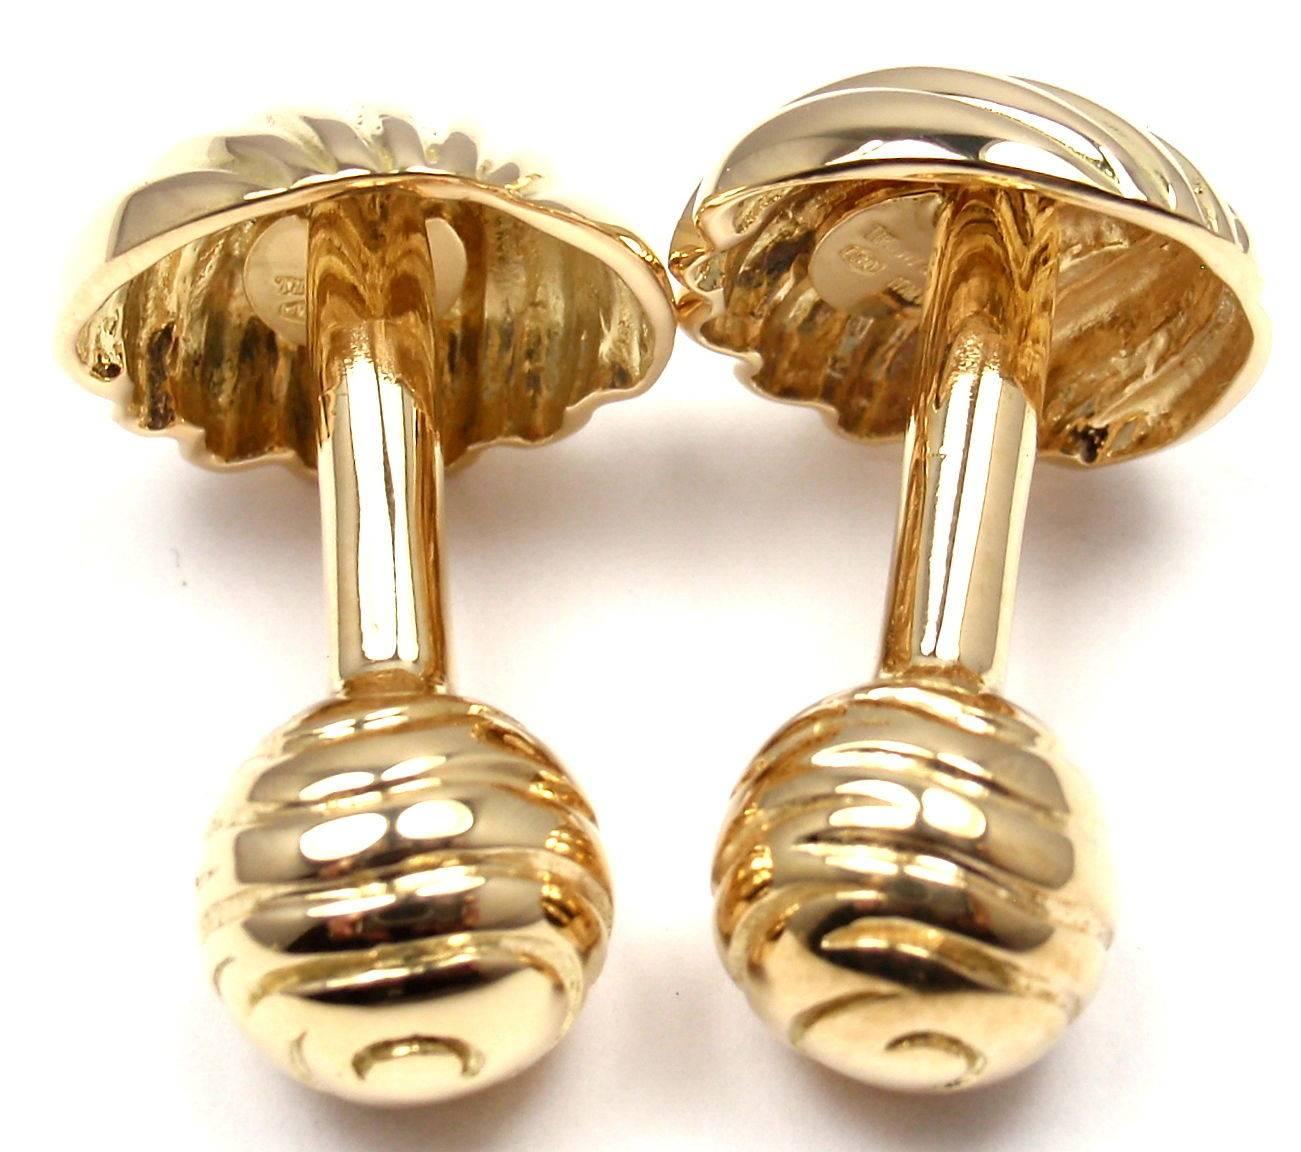 18k Yellow Gold Scalloped Shell Cufflinks by Tiffany & Co.

Details:
Measurements: 16mm x 16mm x 27mm
Weight: 28 grams
Stamped Hallmarks: Tiffany & Co, 750, Italy
*Free Shipping within the United States*

YOUR PRICE: $2,800

0634mtdd